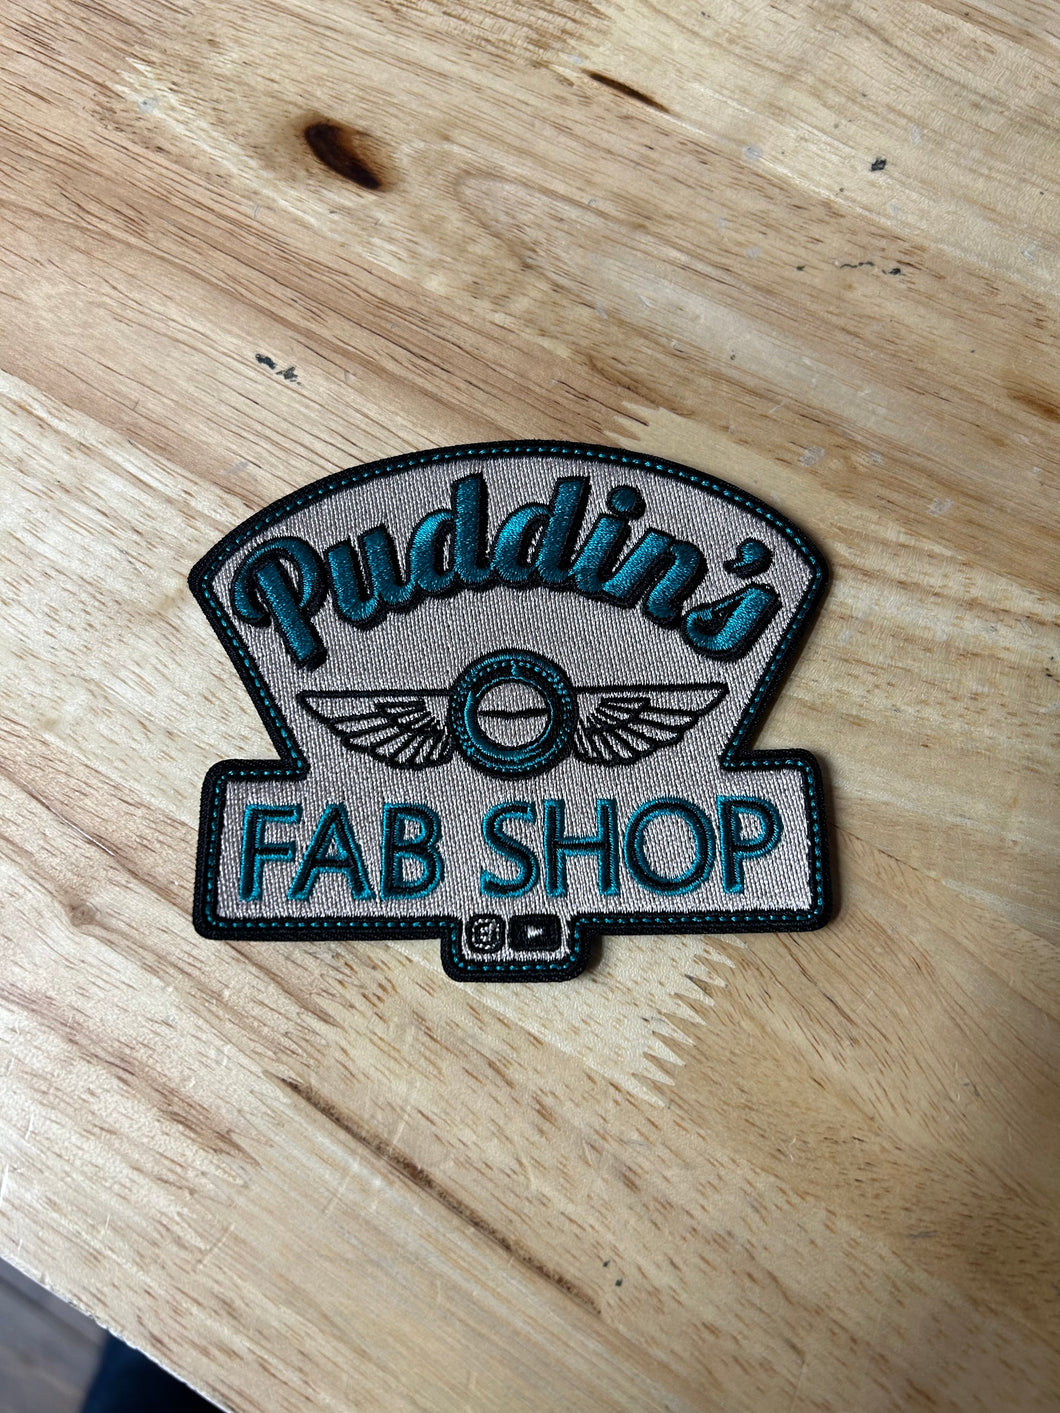 NEW Puddin's Logo IRON ON PATCH